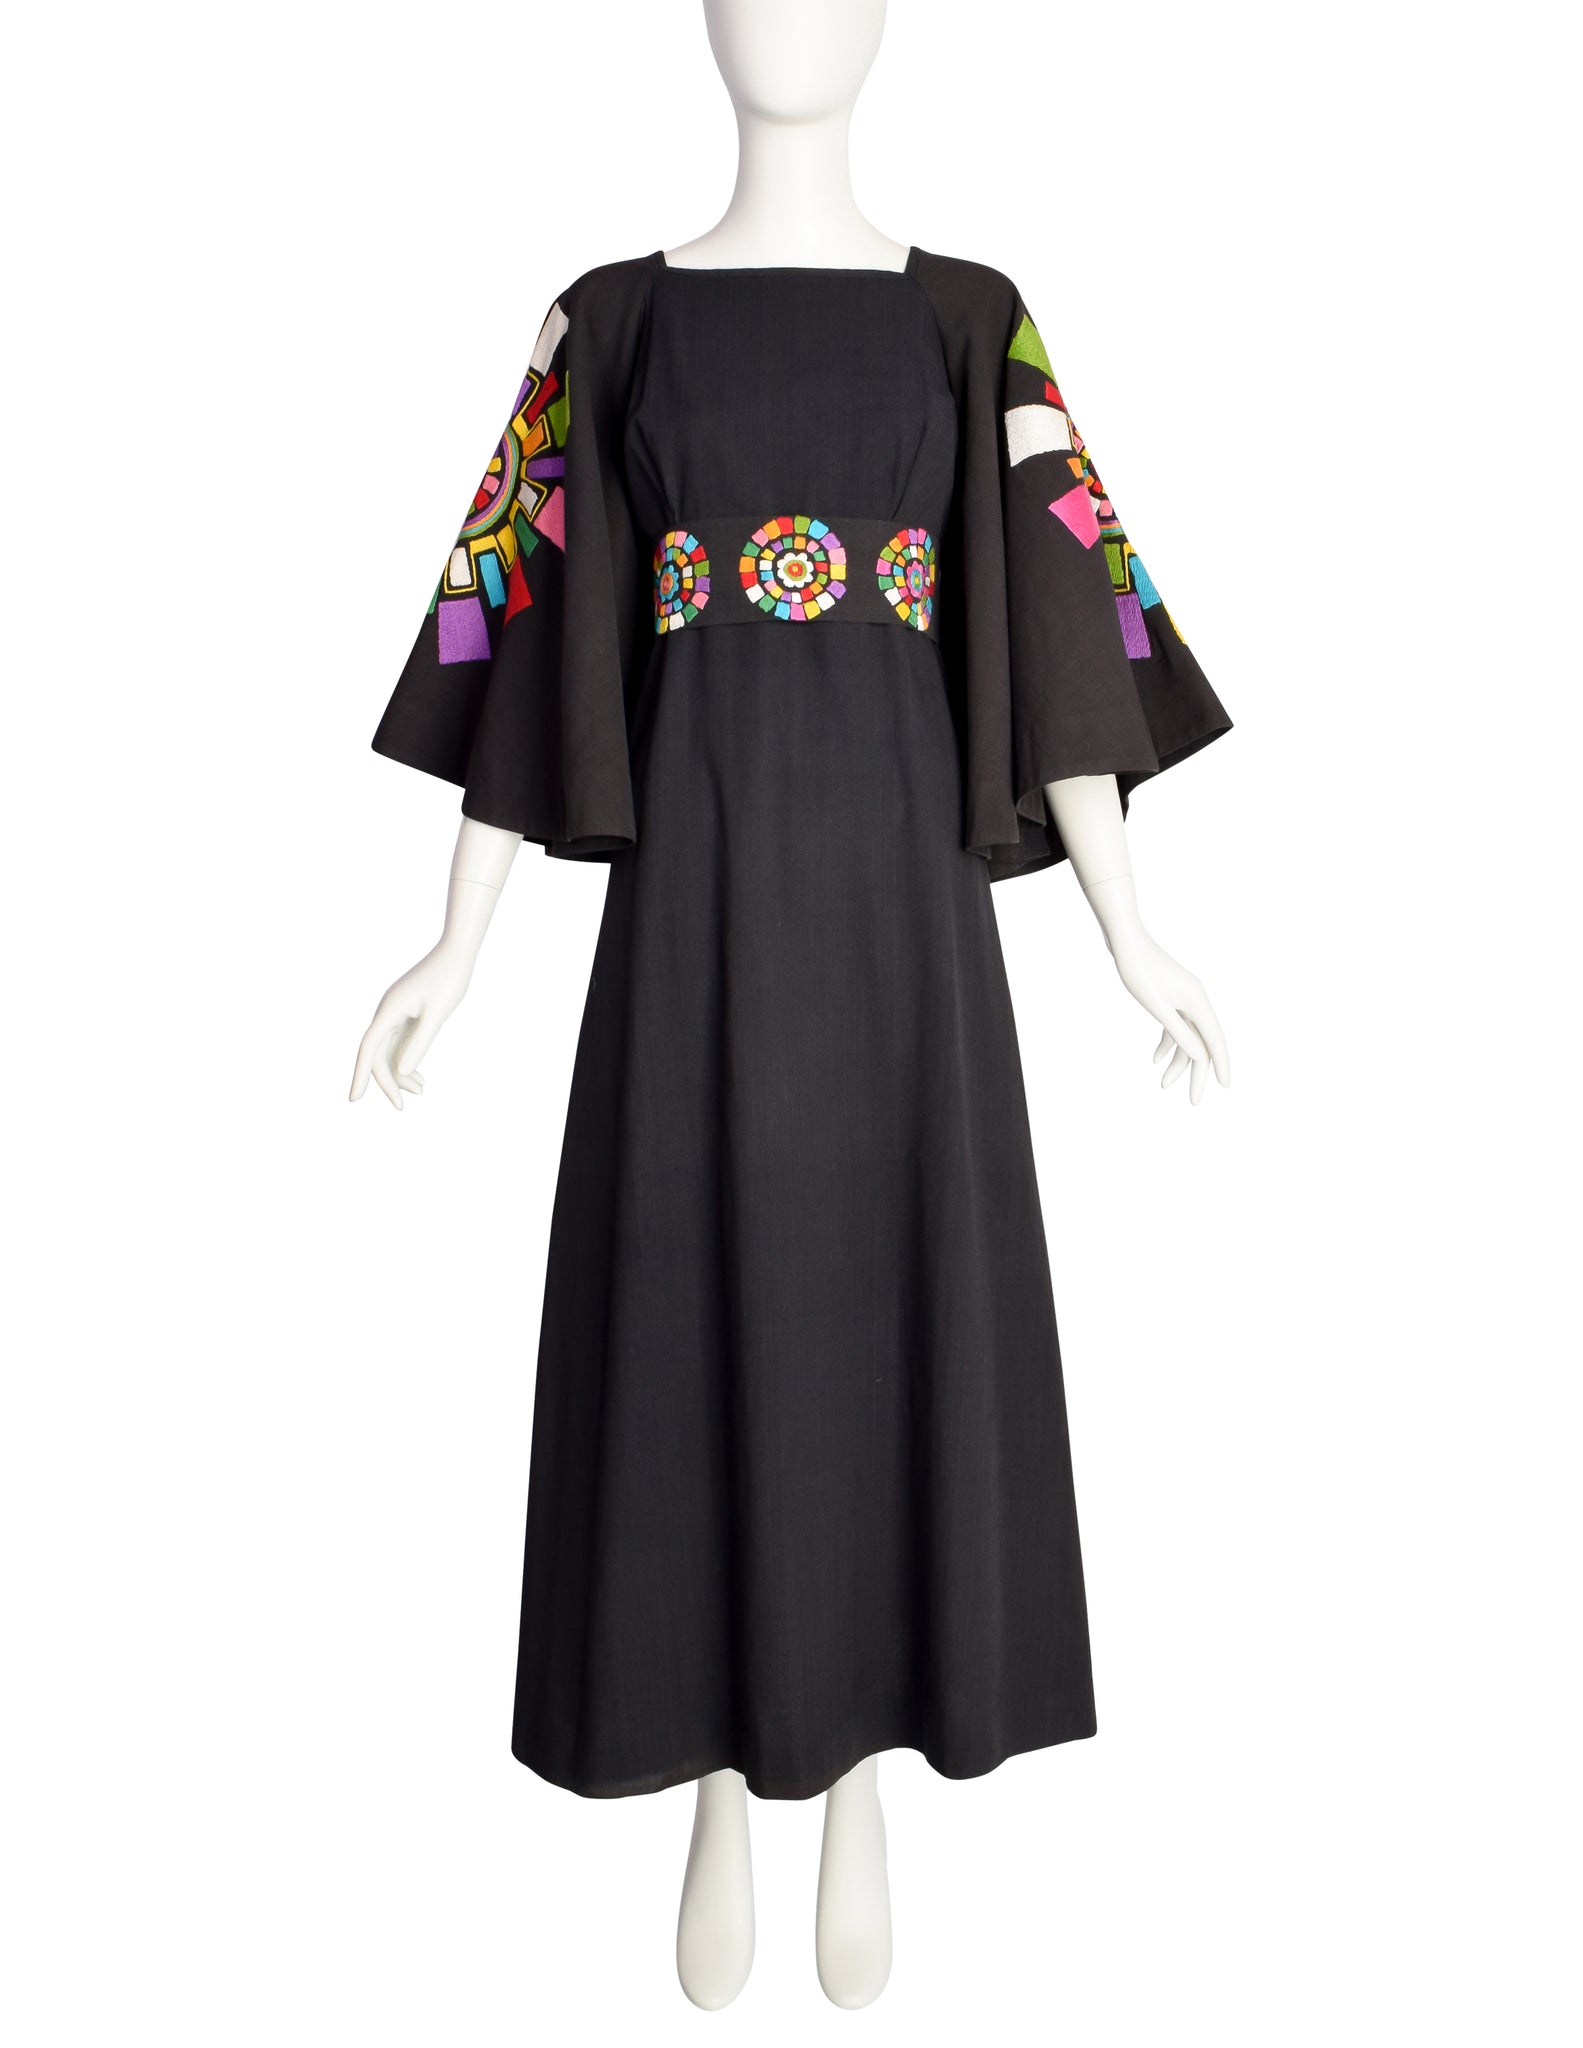 Gorgeous Vintage 1960s Mexican Black Cotton Maxi Dress with Huge Embroidered Rainbow Mandala Bell Sleeves